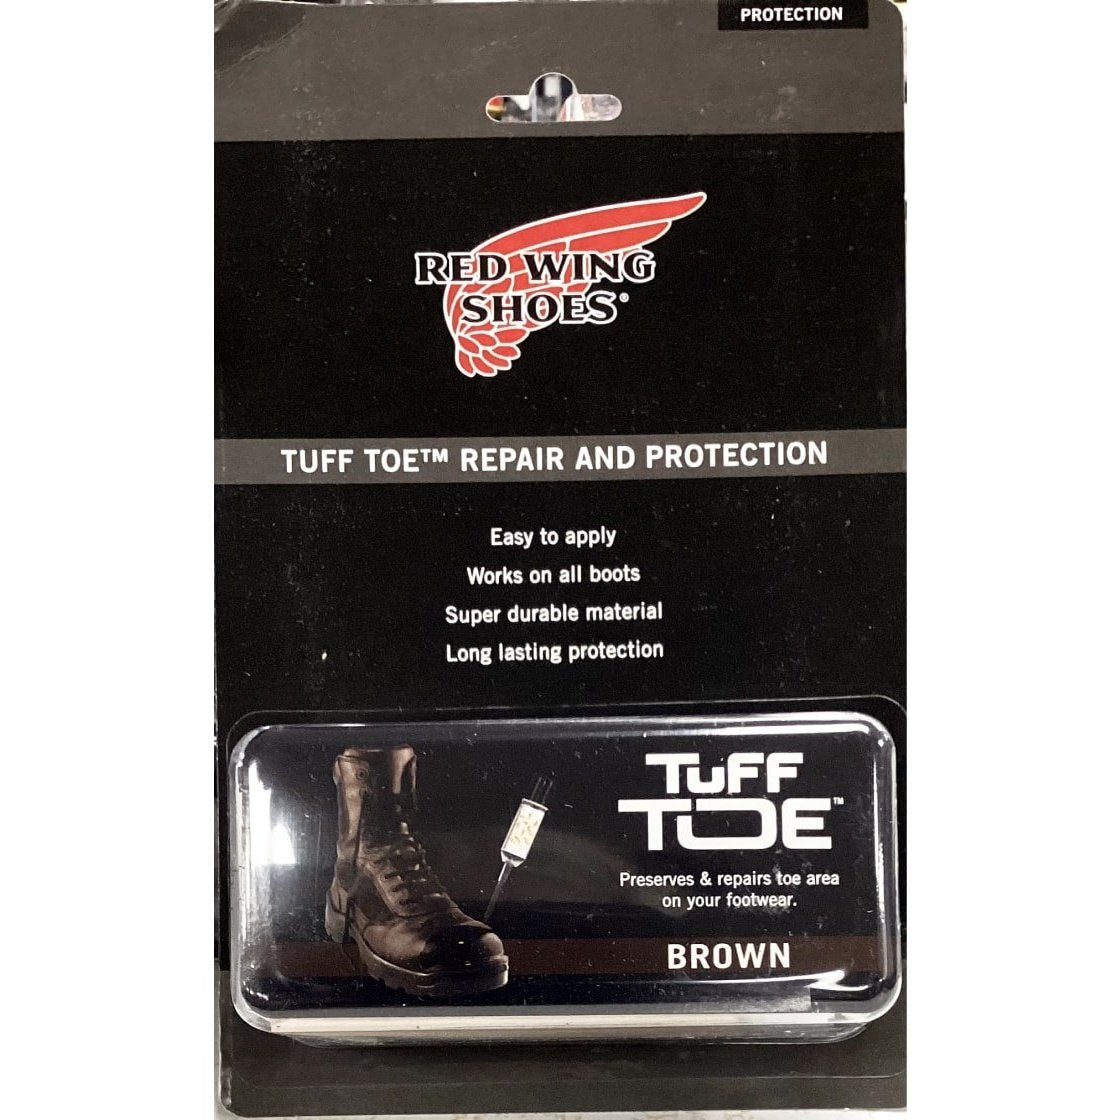 Red Wing Tuff Toe Boot Protection & Repair Adhesive - Red Wing